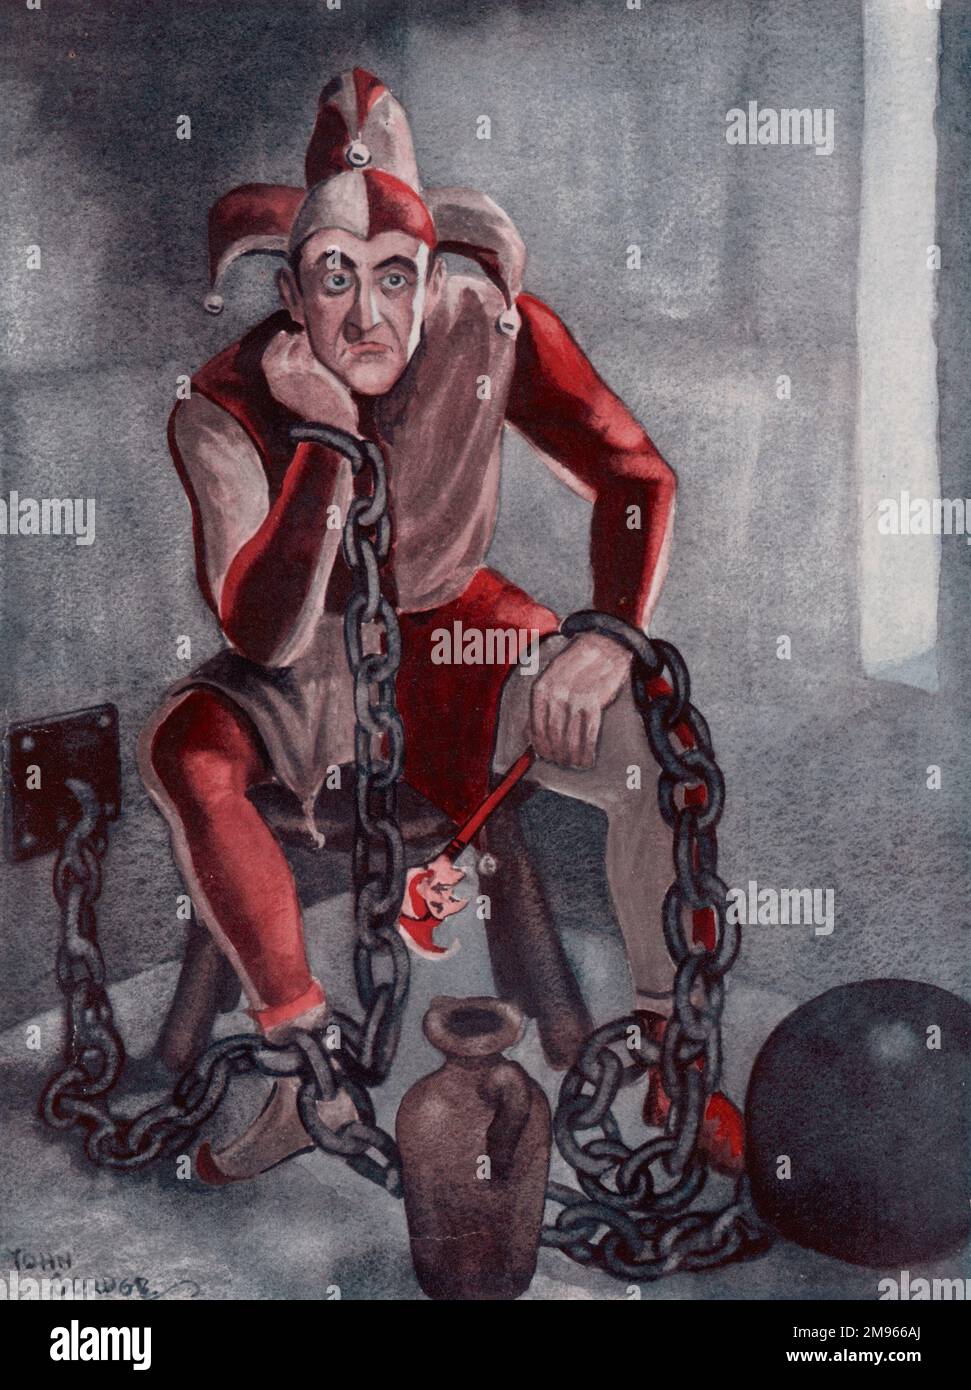 A glum looking jester sits in a prison cell attached to a ball and chain. Stock Photo